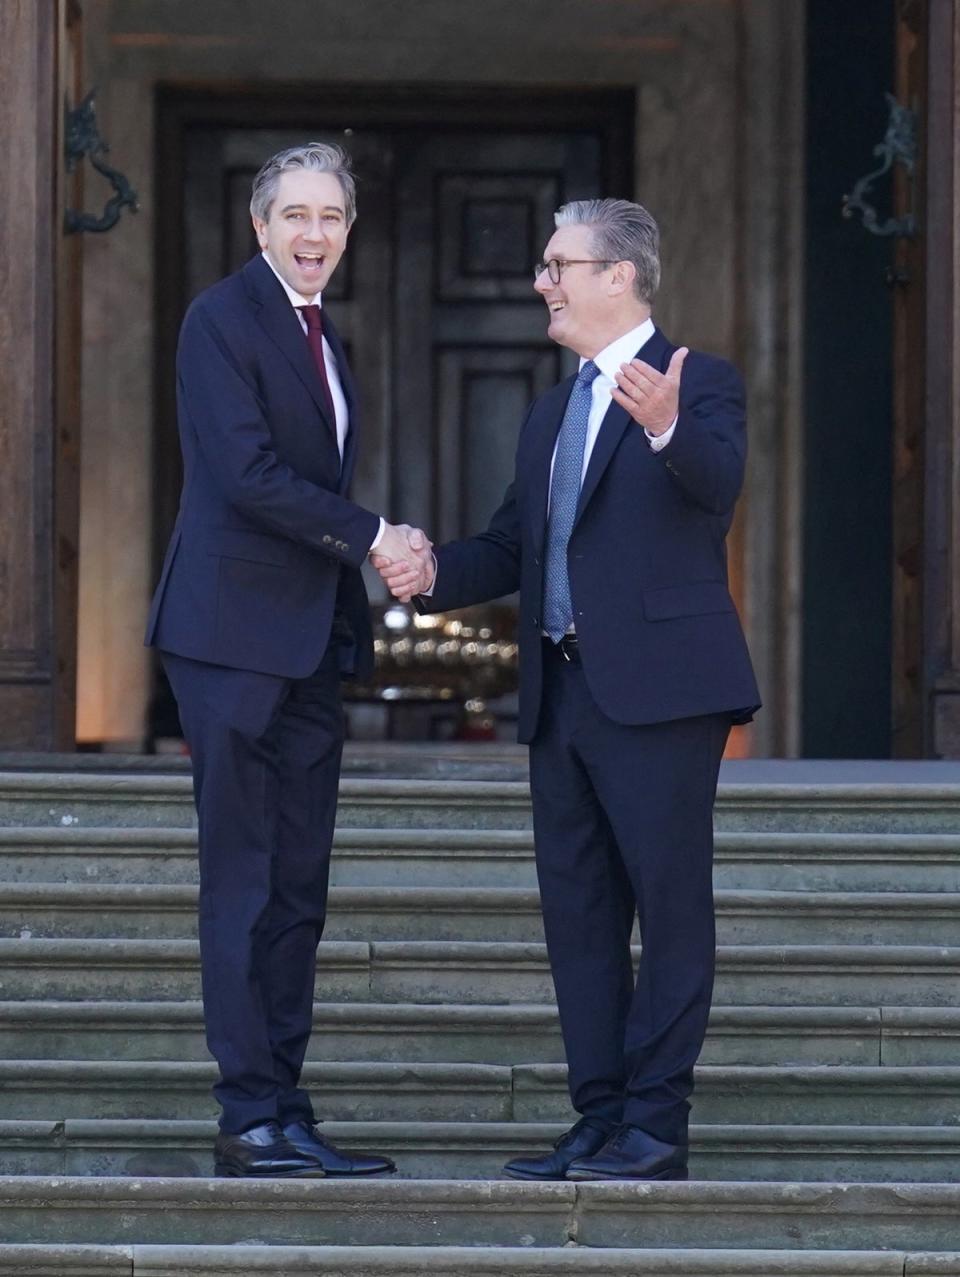 Starmer greets Harris at Blenheim Palace prior to the summit (via Reuters)